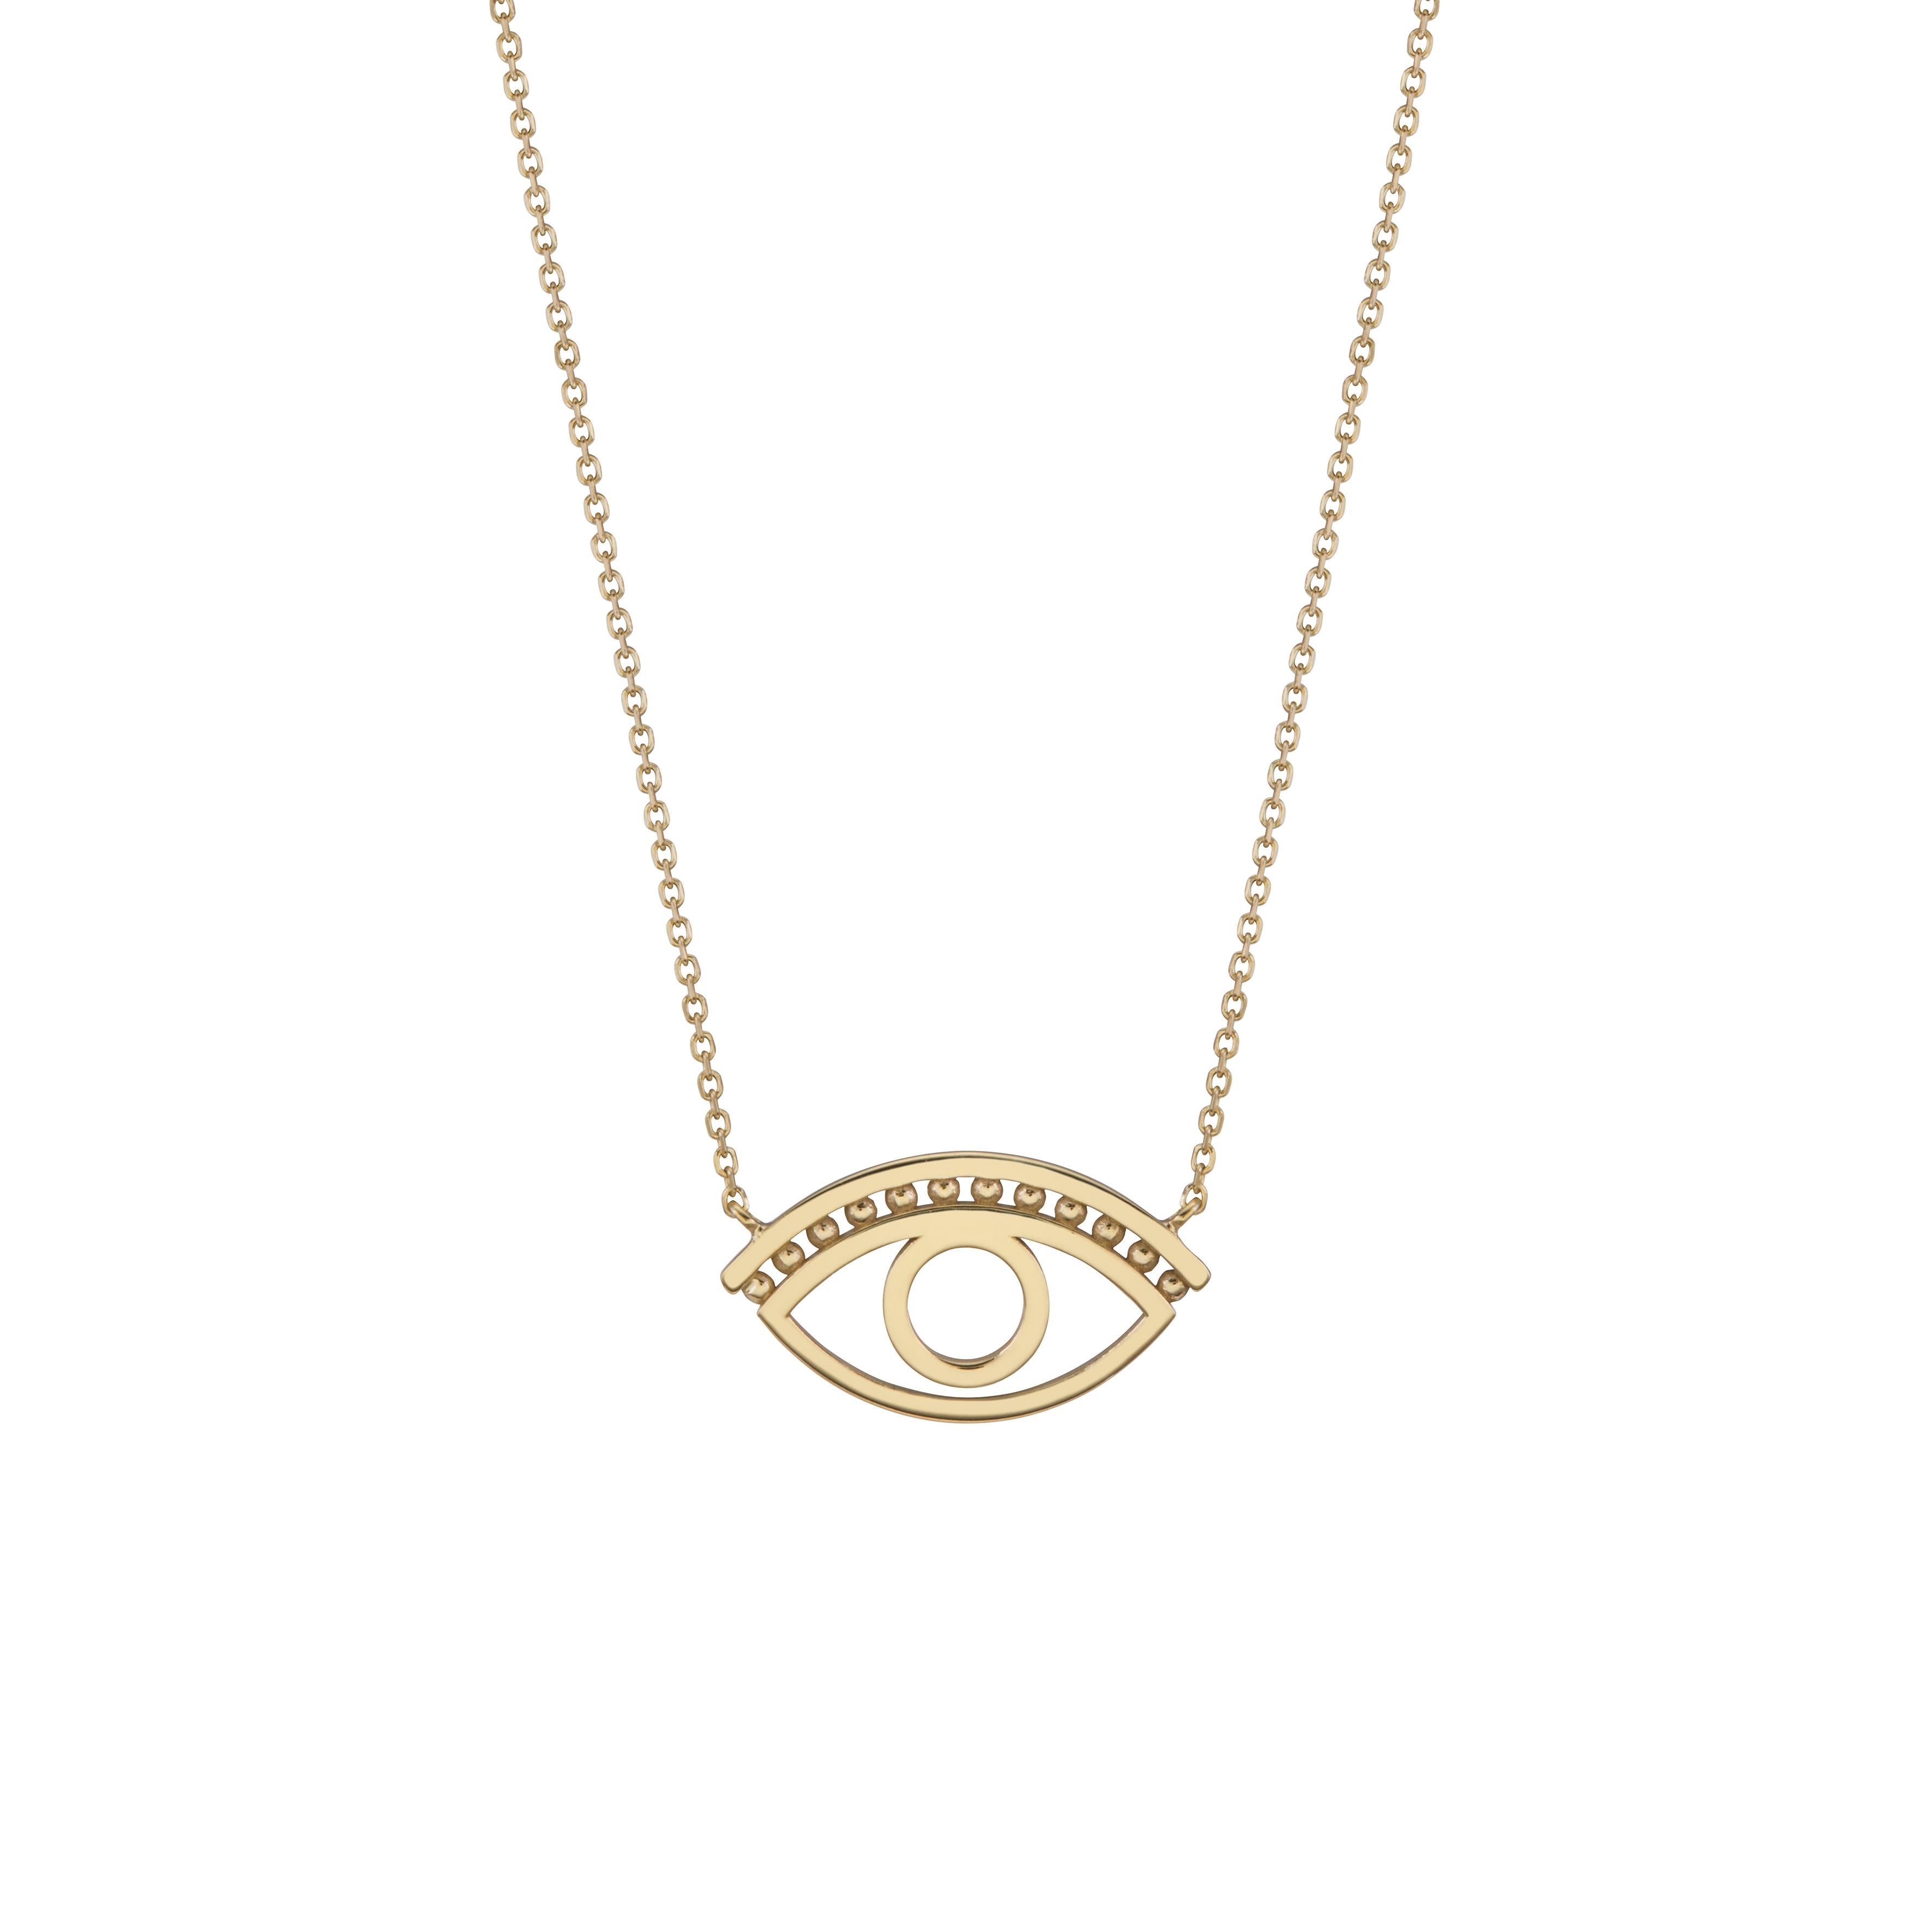 Evil Eye Traditional Greek Eye Pendant Necklace in 14Kt Yellow Gold Luky 